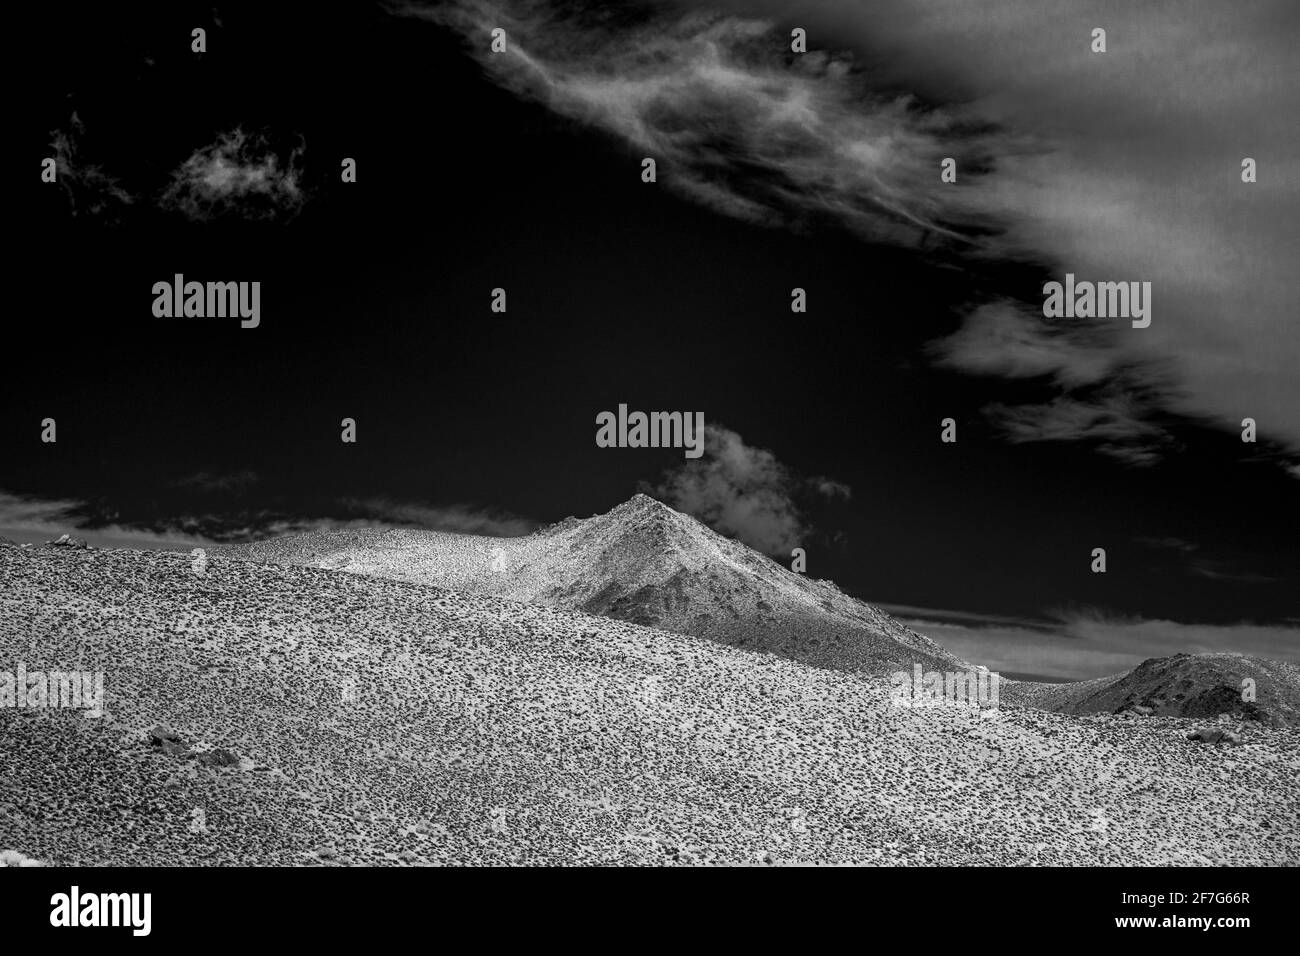 Barren hills and mountains under black skies with white clouds. High contrast black and white image. Stock Photo